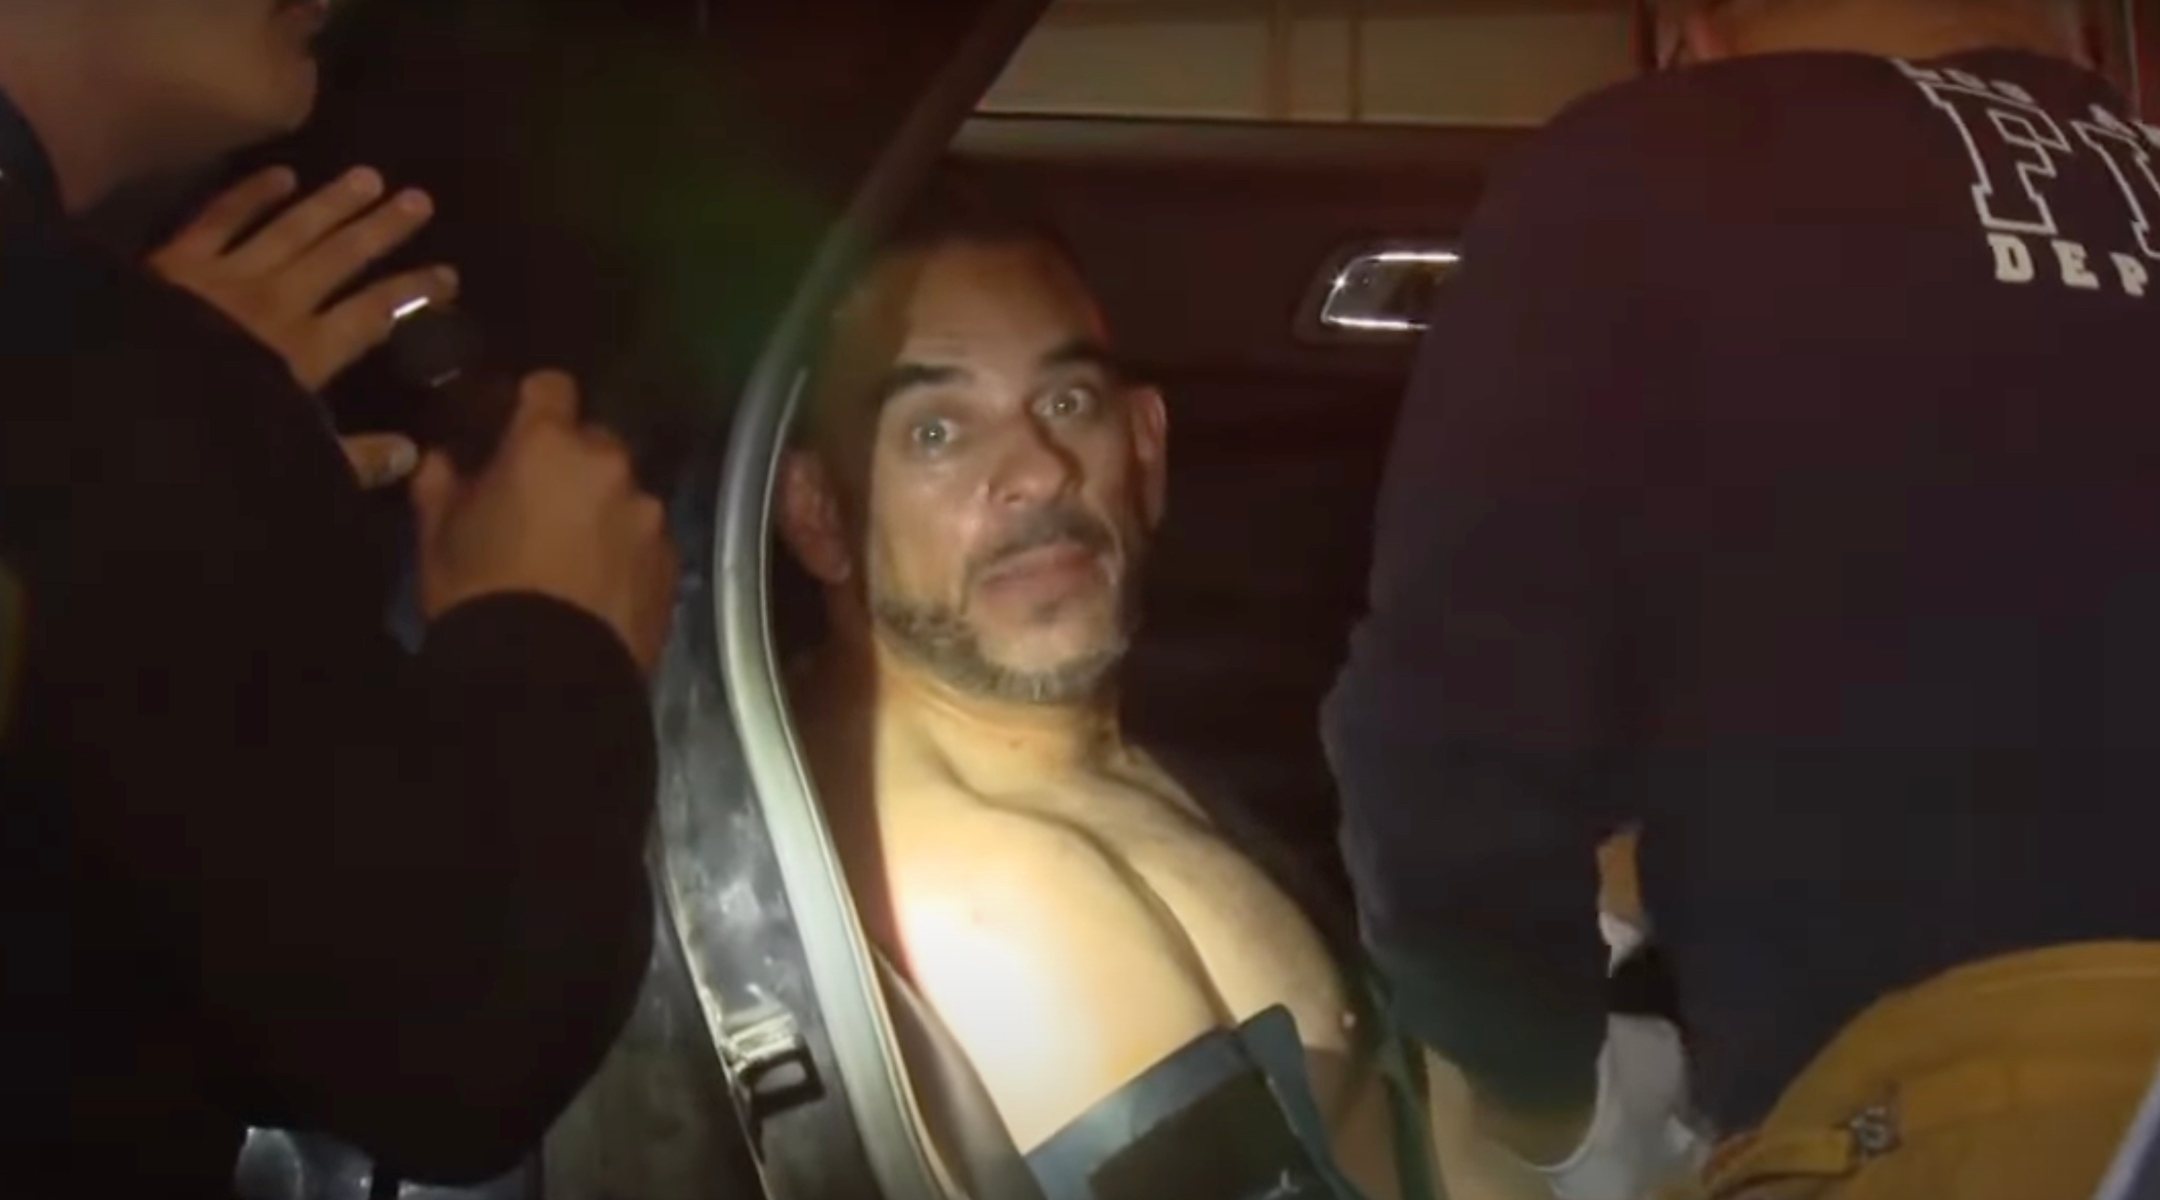 Daniel Garcia, a suspect in the home invasion of a Southern California Jewish family, yells “Free Palestine” as police place him under arrest in Studio City, California, Oct. 25, 2023. (FOX 11 Los Angeles/screenshot via YouTube)